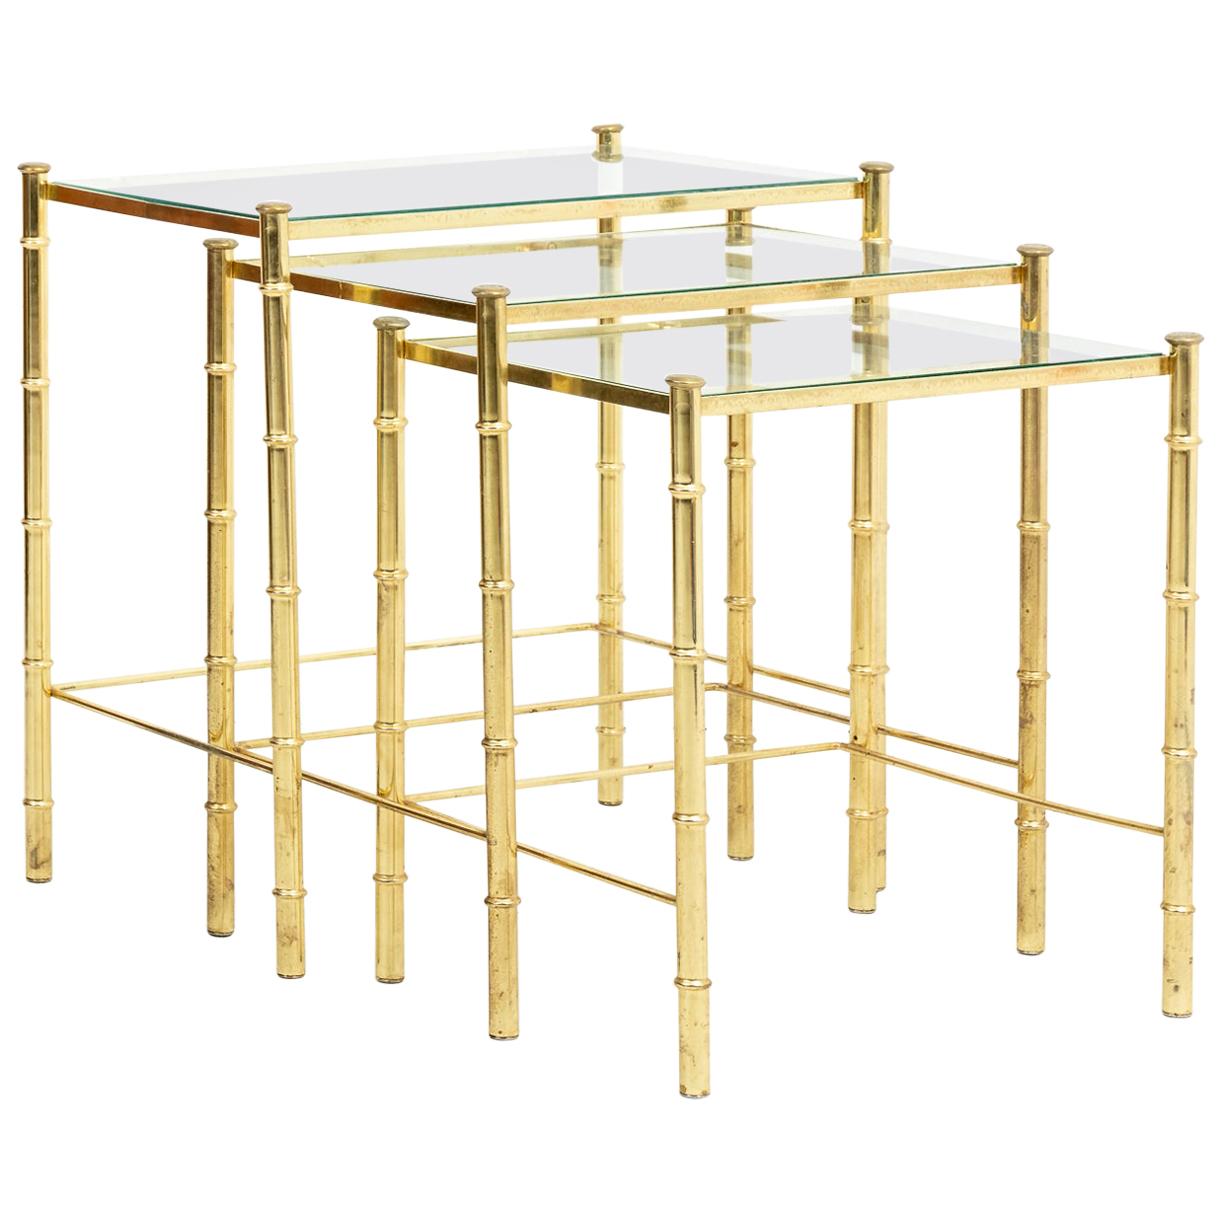 Faux Bamboo Nesting Tables For Sale